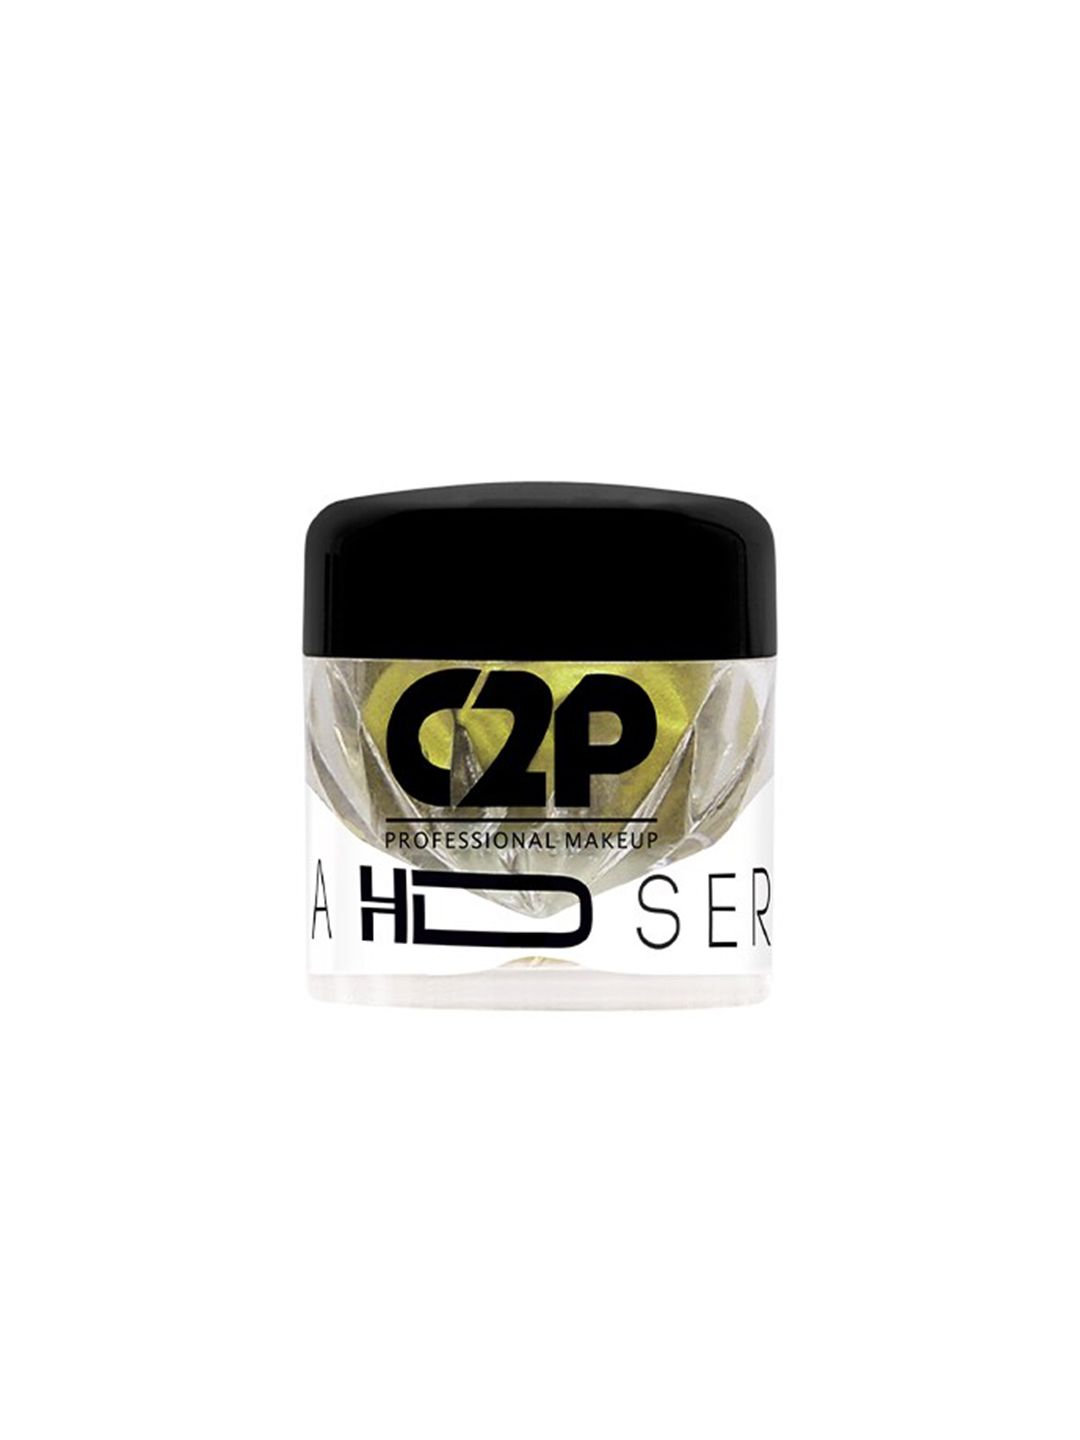 C2P PROFESSIONAL MAKEUP HD Loose Precious Pigments 2 g - Boss Lady 128 Price in India